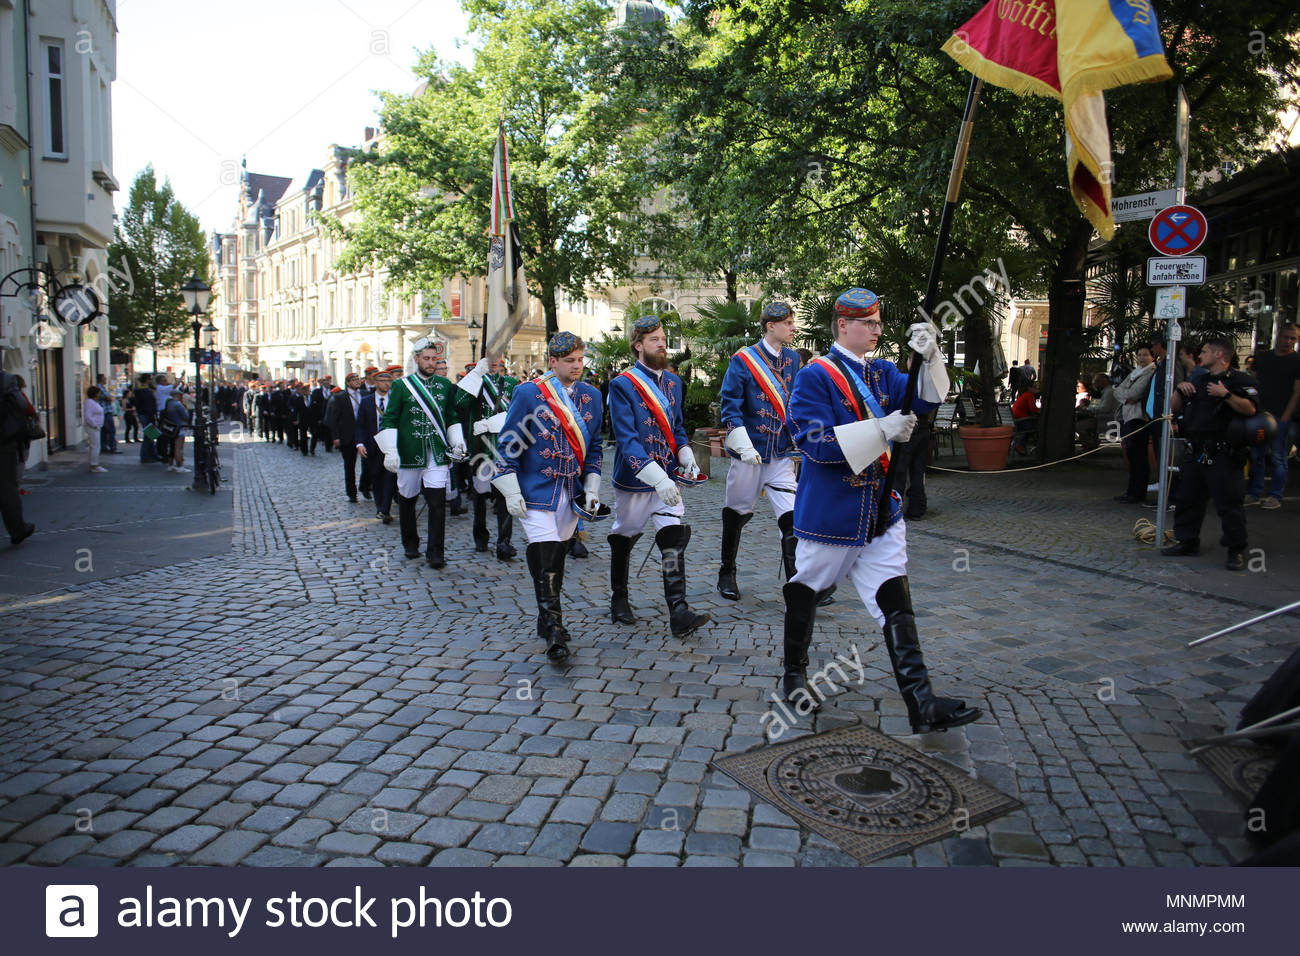 Coburg, Germany. 18th May, 2018. Participants march through the city centre in Coburg, Germany where the annual meeting of students' associations from Germany and Austria, has officially been opened. Each year the student associations gather to celebrate the traditional values they espouse. As is the case most years there was a small protest against the event and a heavy police presence was maintained. Credit: reallifephotos/Alamy Live News Stock Photo